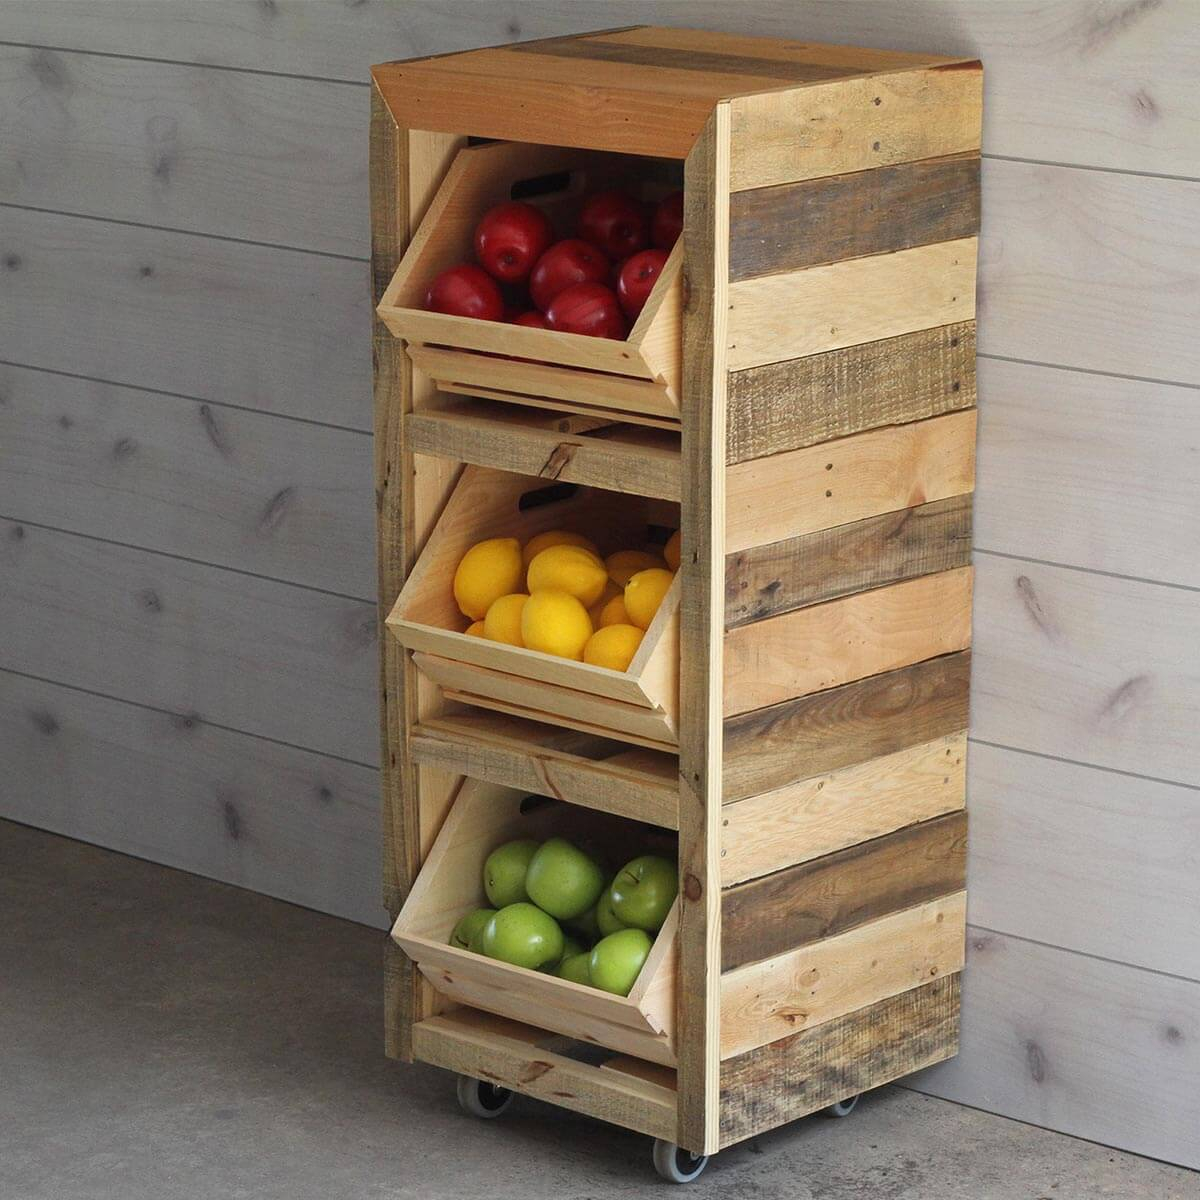 Build A Produce Storage Unit With Crates The Family Handyman throughout dimensions 1200 X 1200